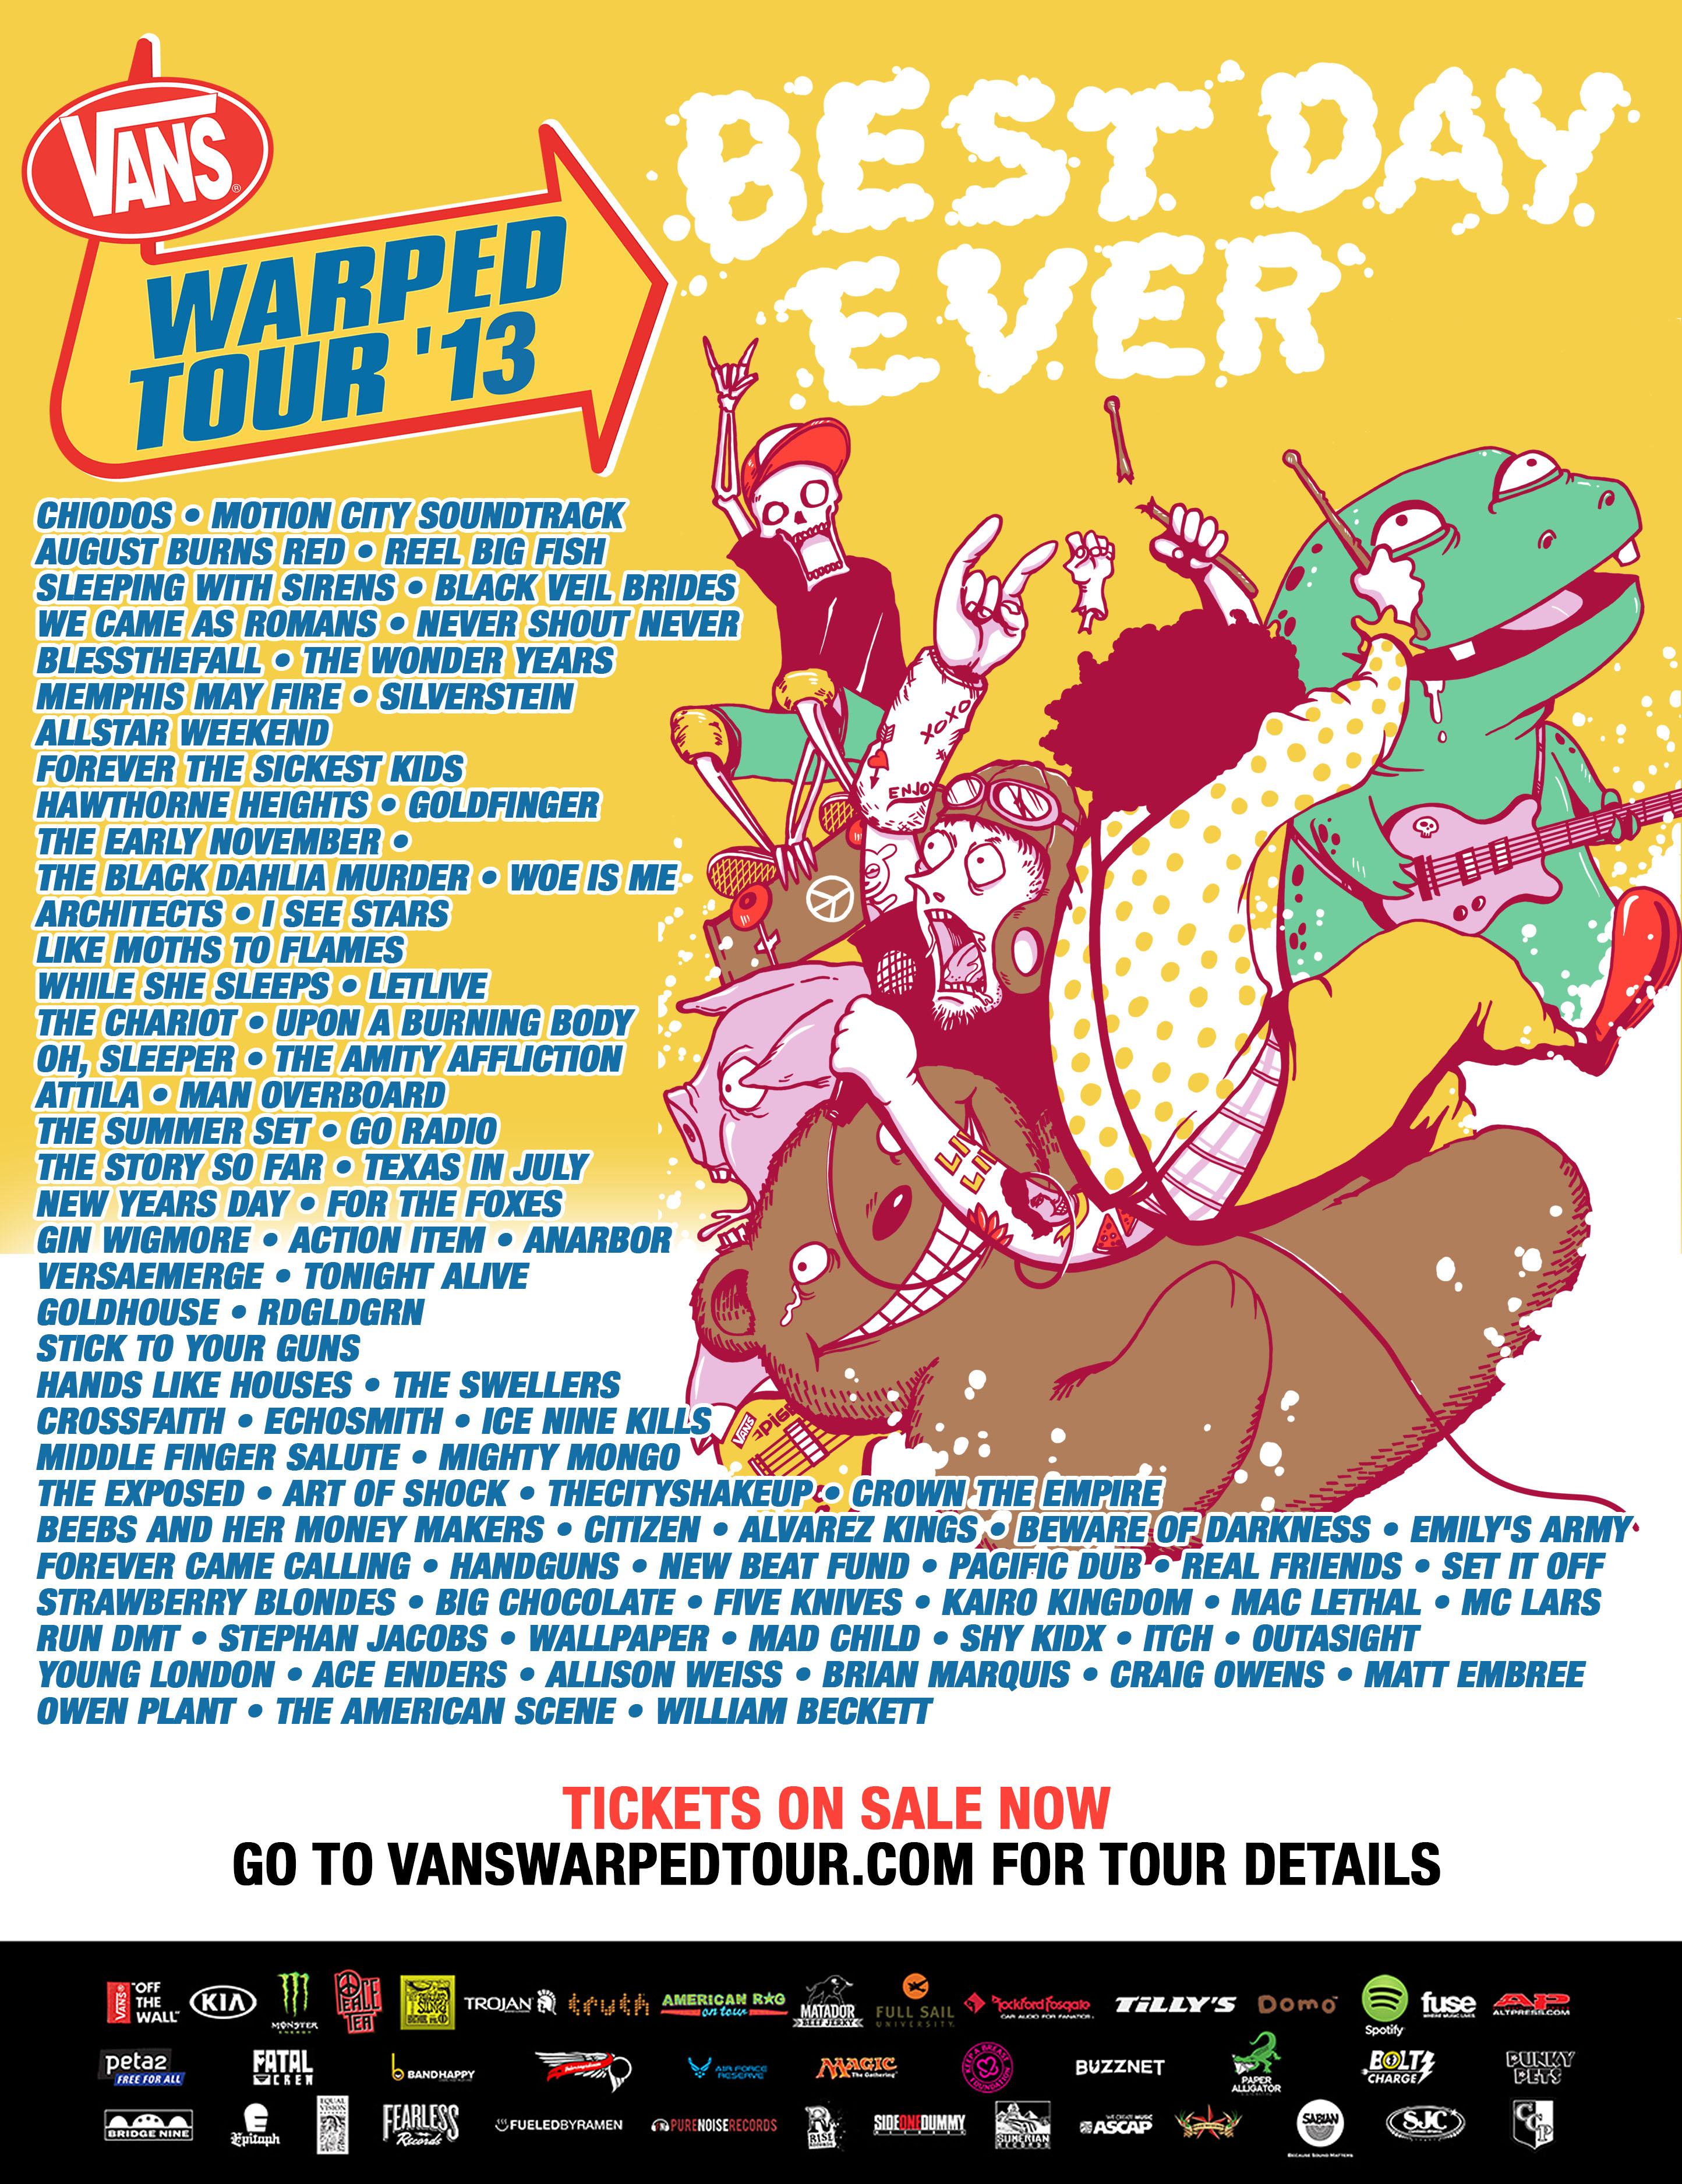 VANS WARPED TOUR Announces Attractions And Activities